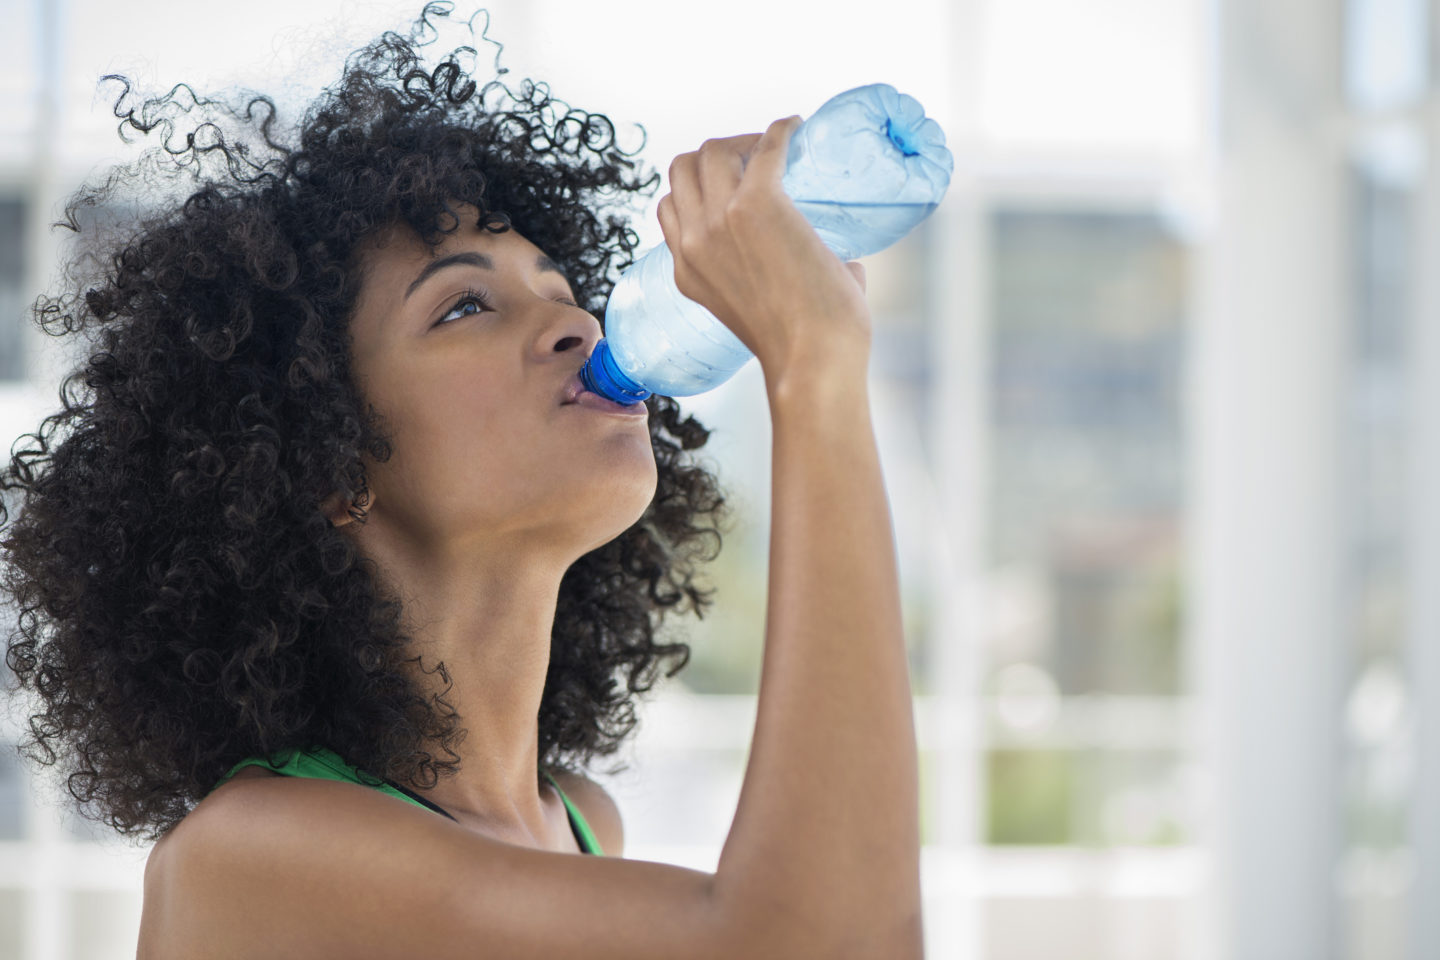 Can Guzzling Water Prevent UTIs?